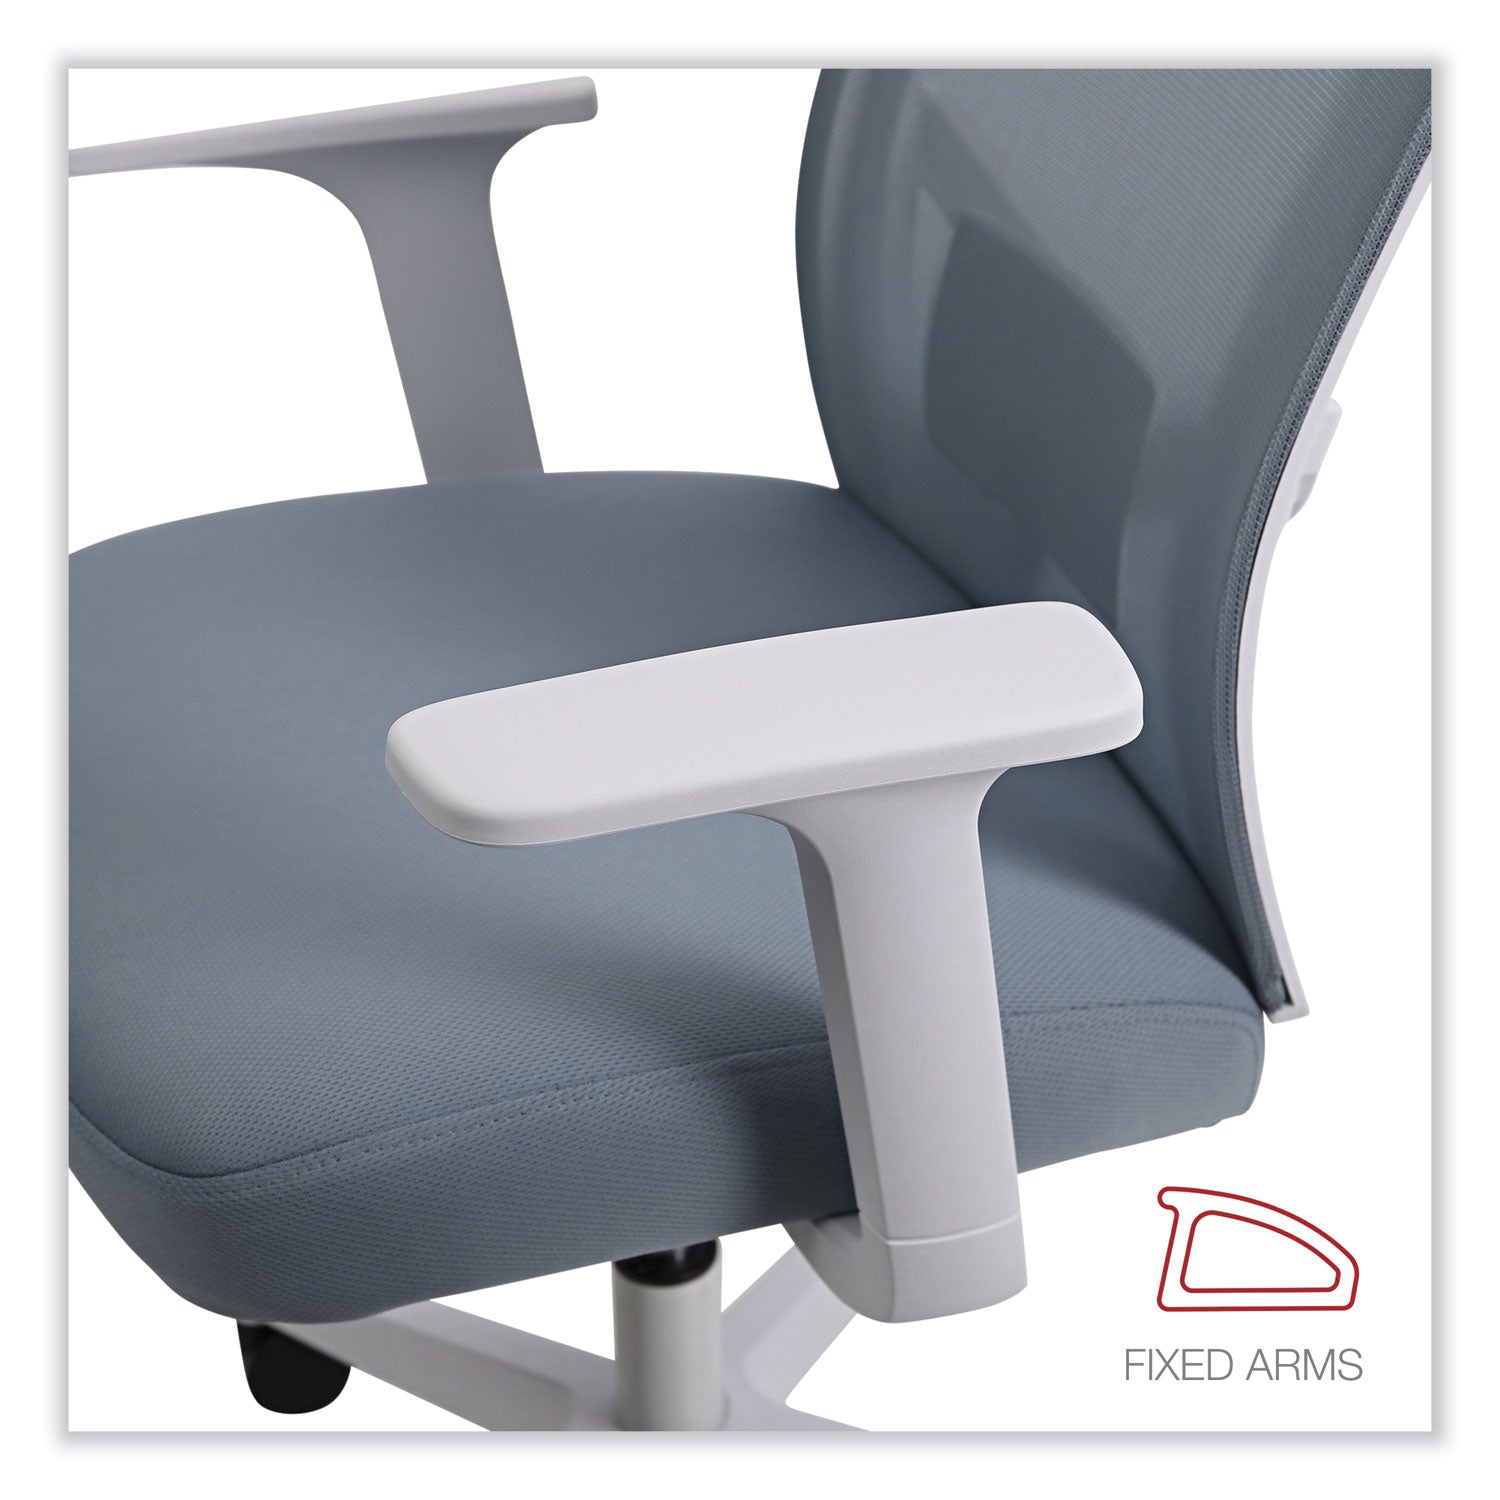 mesh-back-fabric-task-chair-supports-up-to-275-lb-1732-to-211-seat-height-seafoam-blue-seat-back_alews42b77 - 6